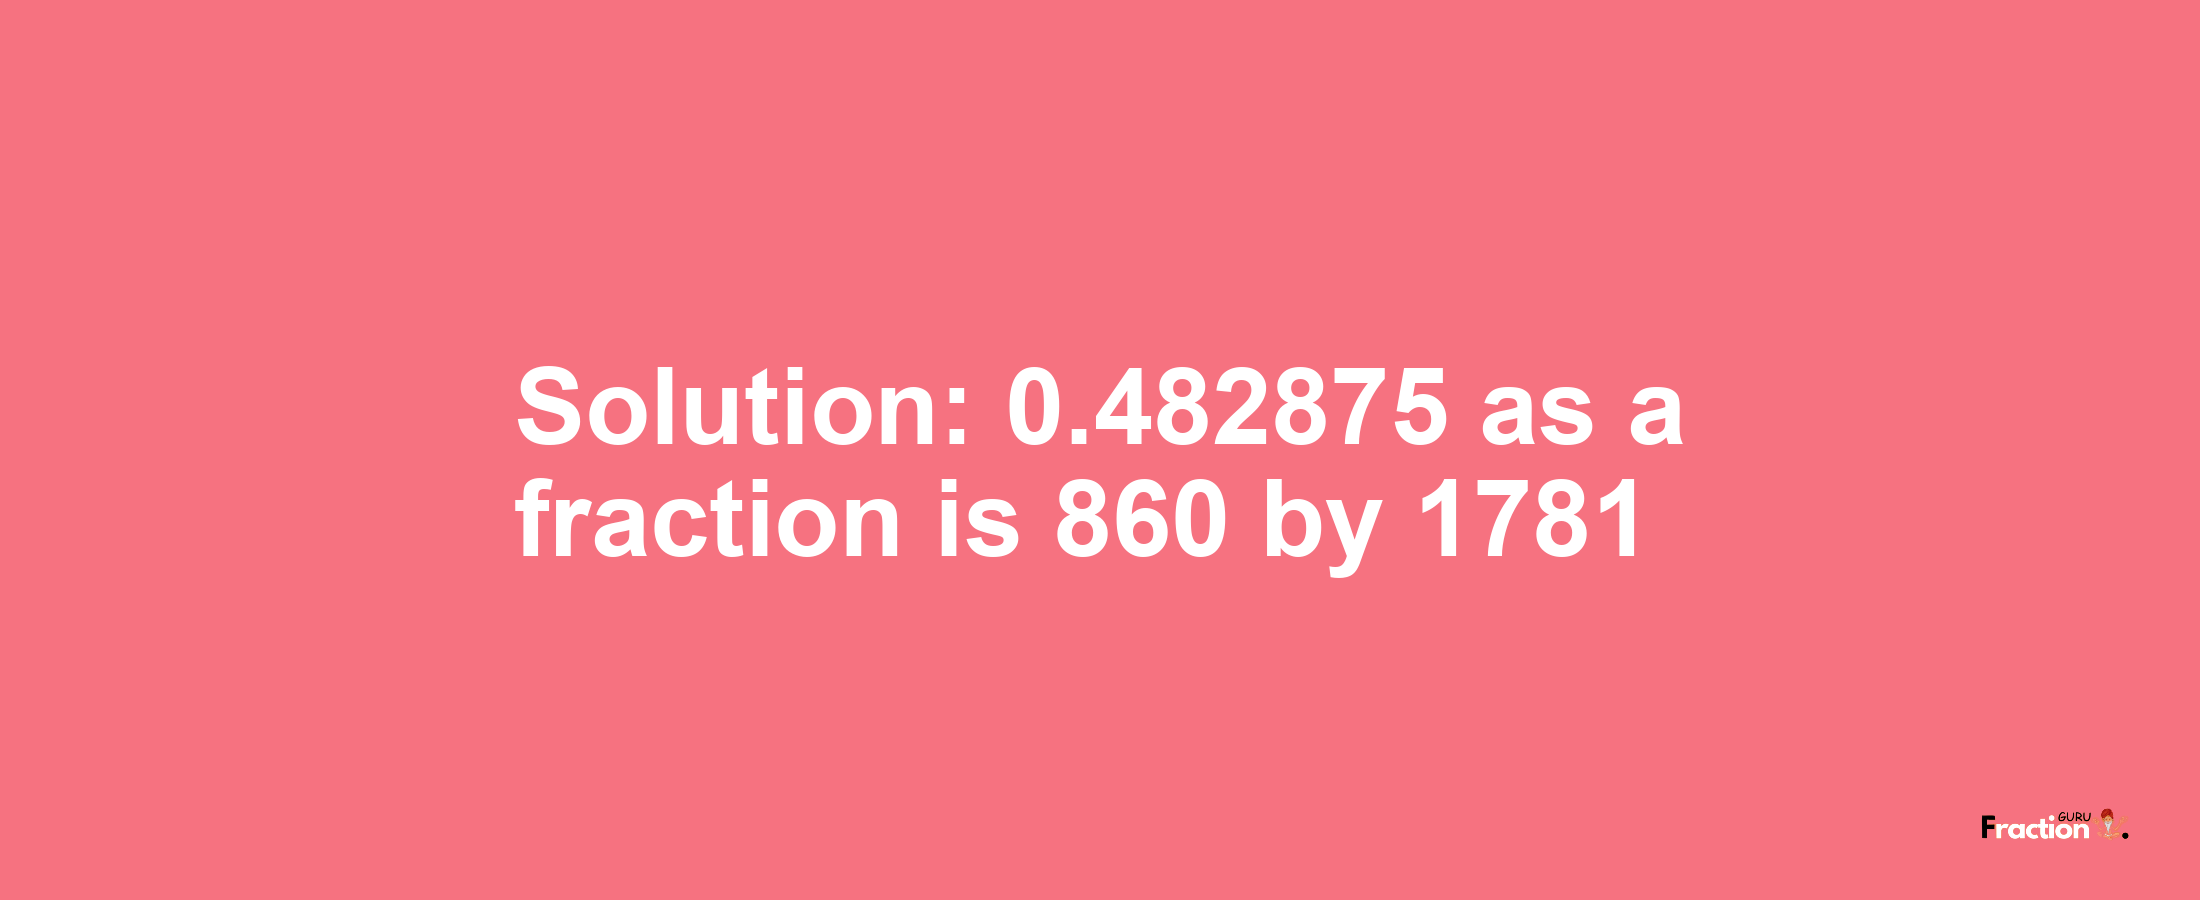 Solution:0.482875 as a fraction is 860/1781